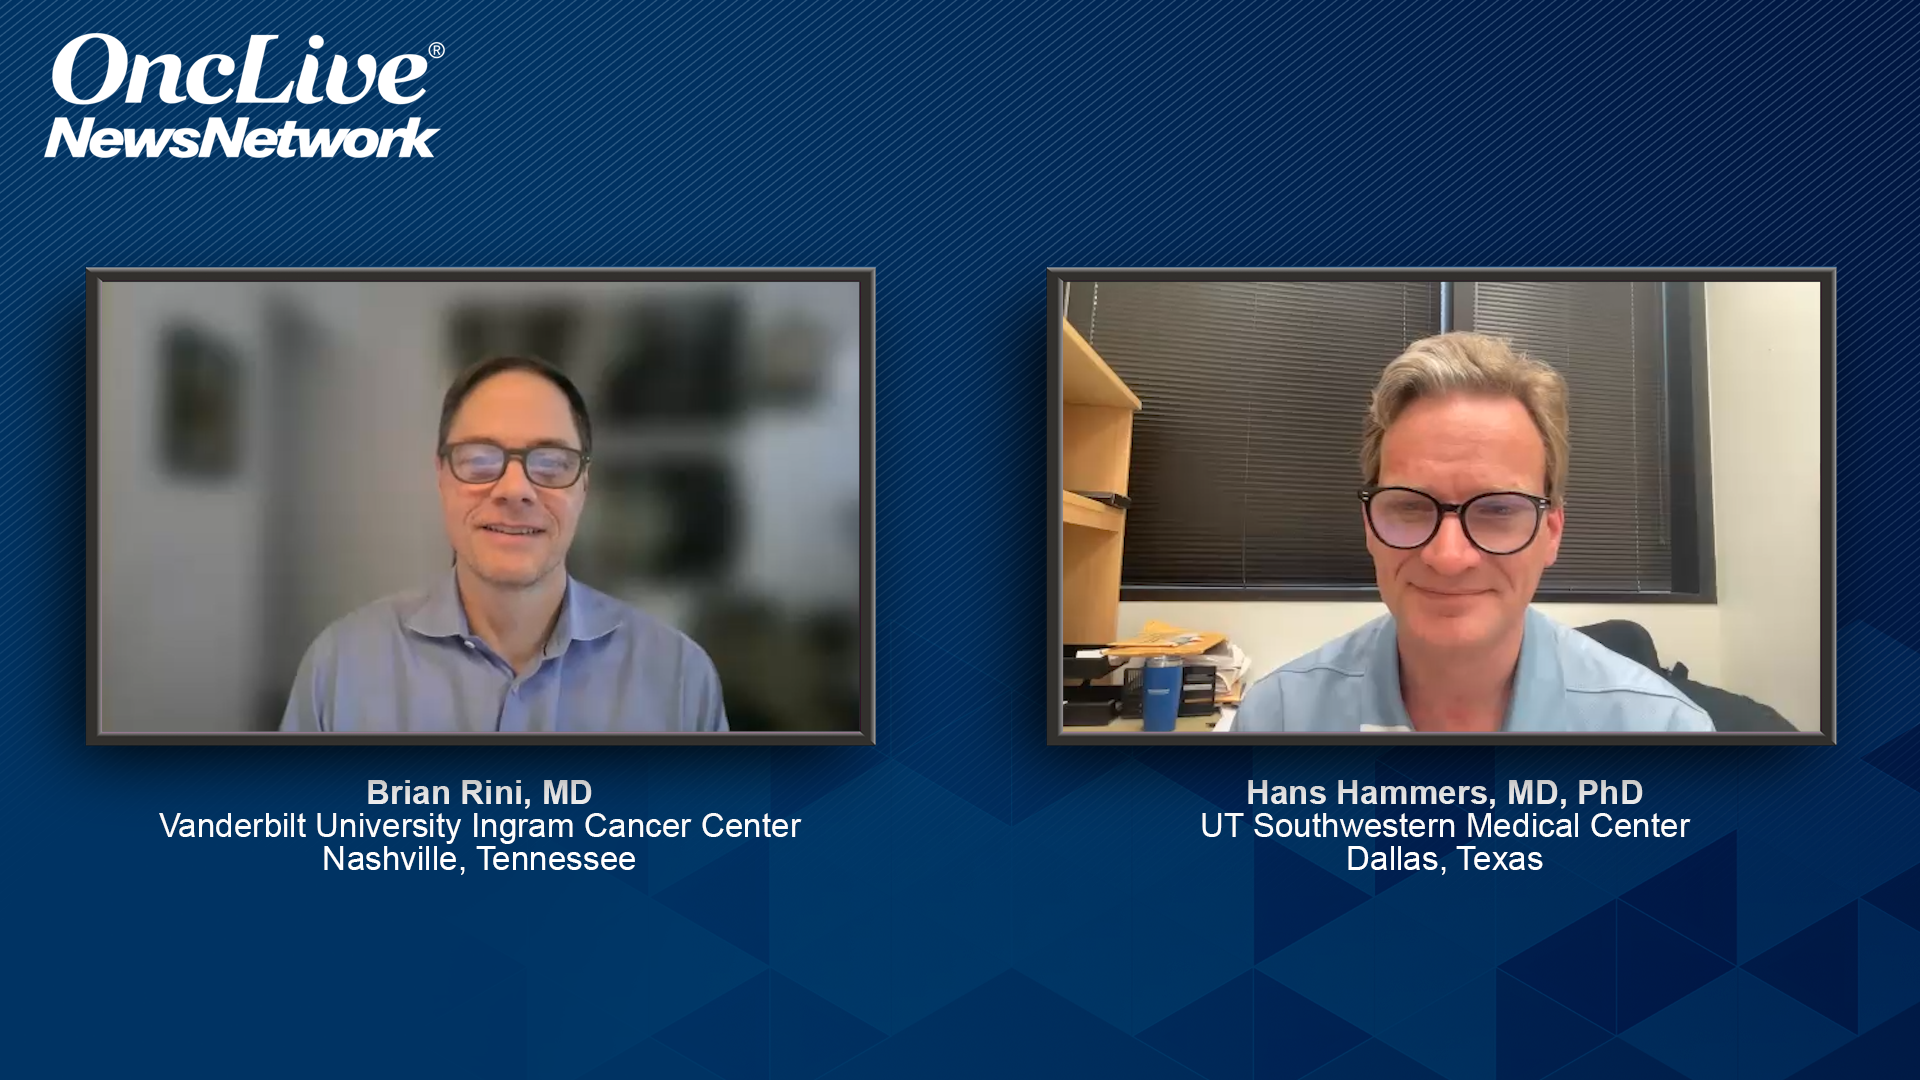 Brian Rini, MD, and Hans Hammers, MD, PhD, experts on kidney cancer